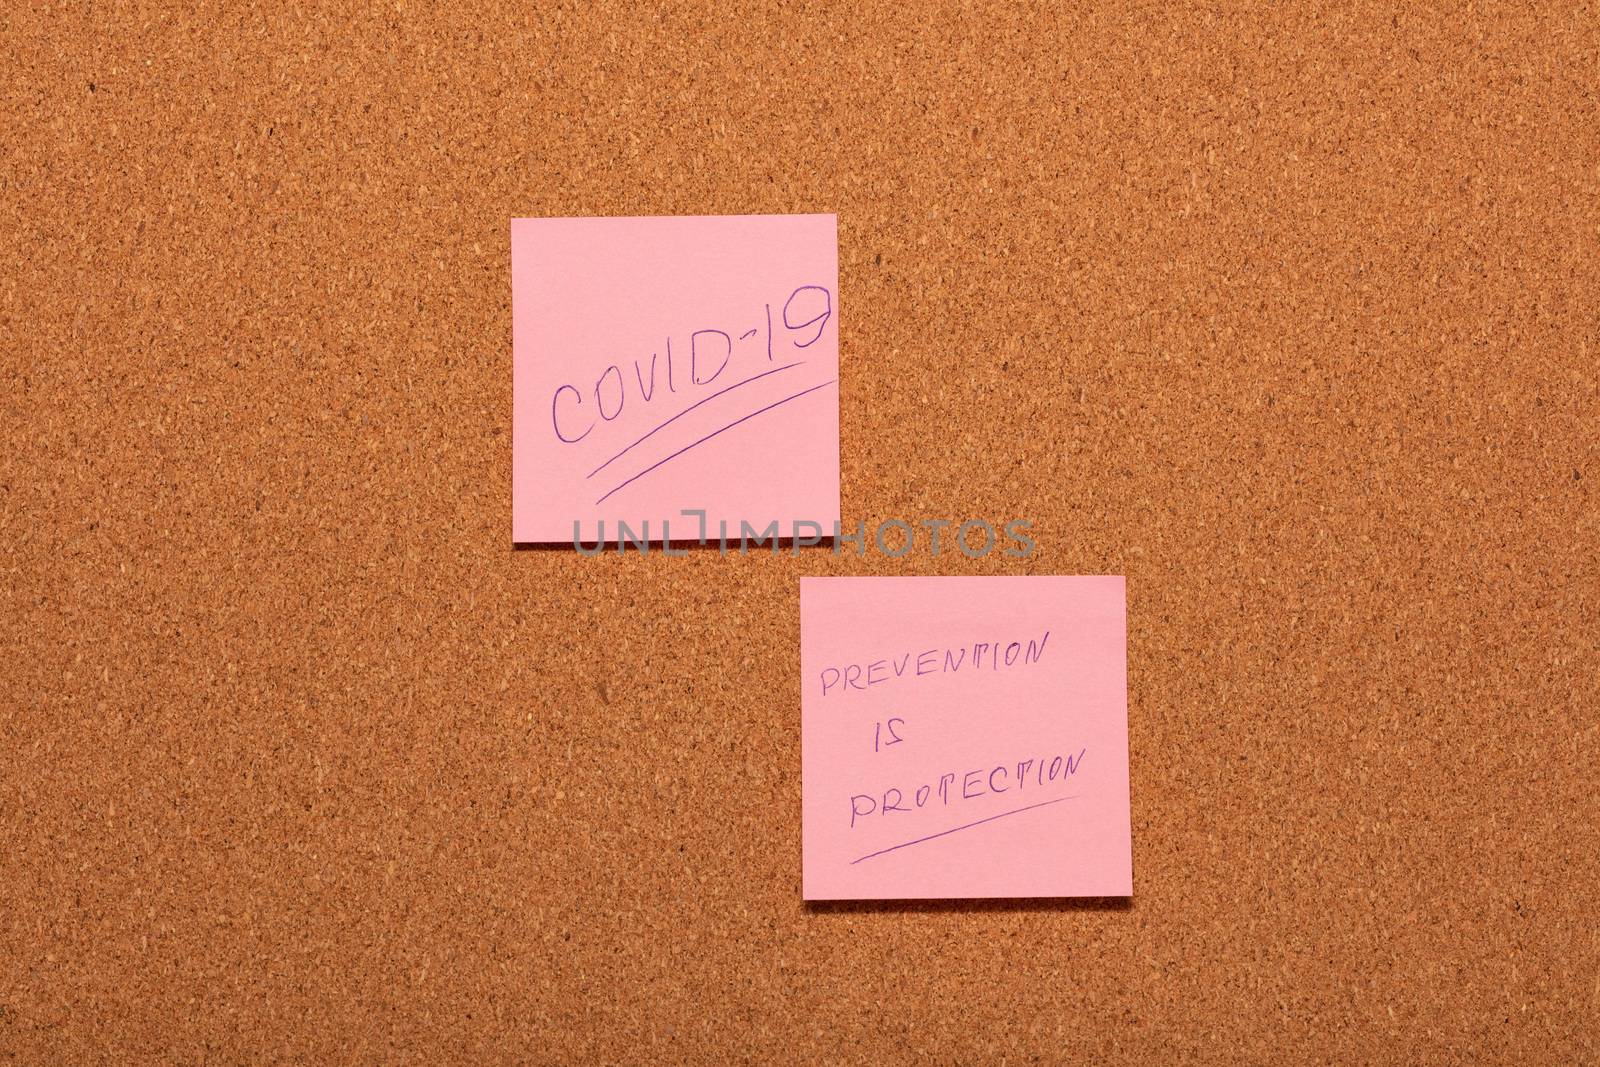 Covid-19 and Prevention is Protection handwritten on two pink stickers on a cork notice-board. by DamantisZ